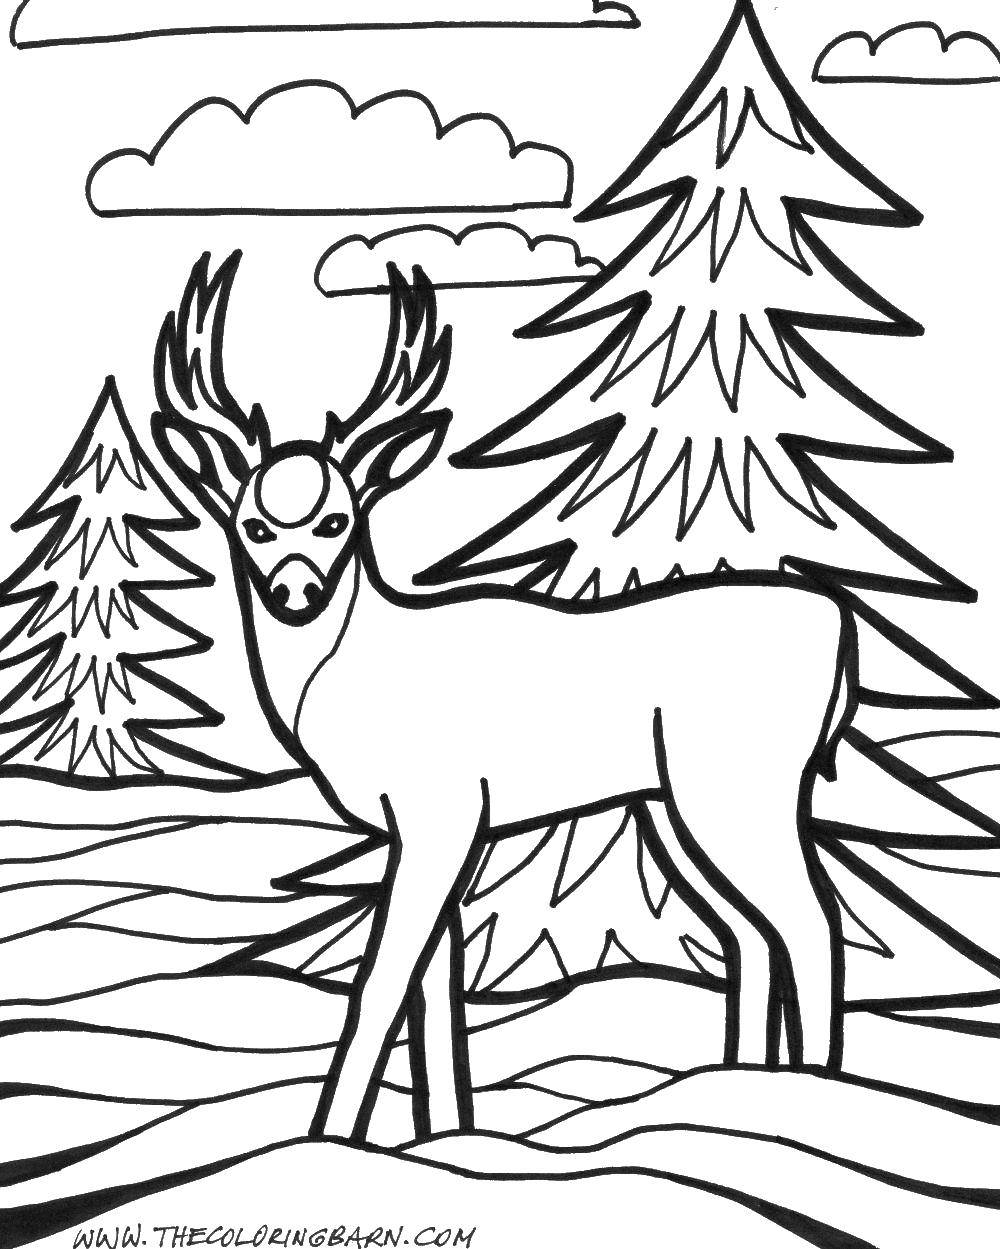 Coloring Deer and Christmas trees. Category animals. Tags:  deer, forest, trees.